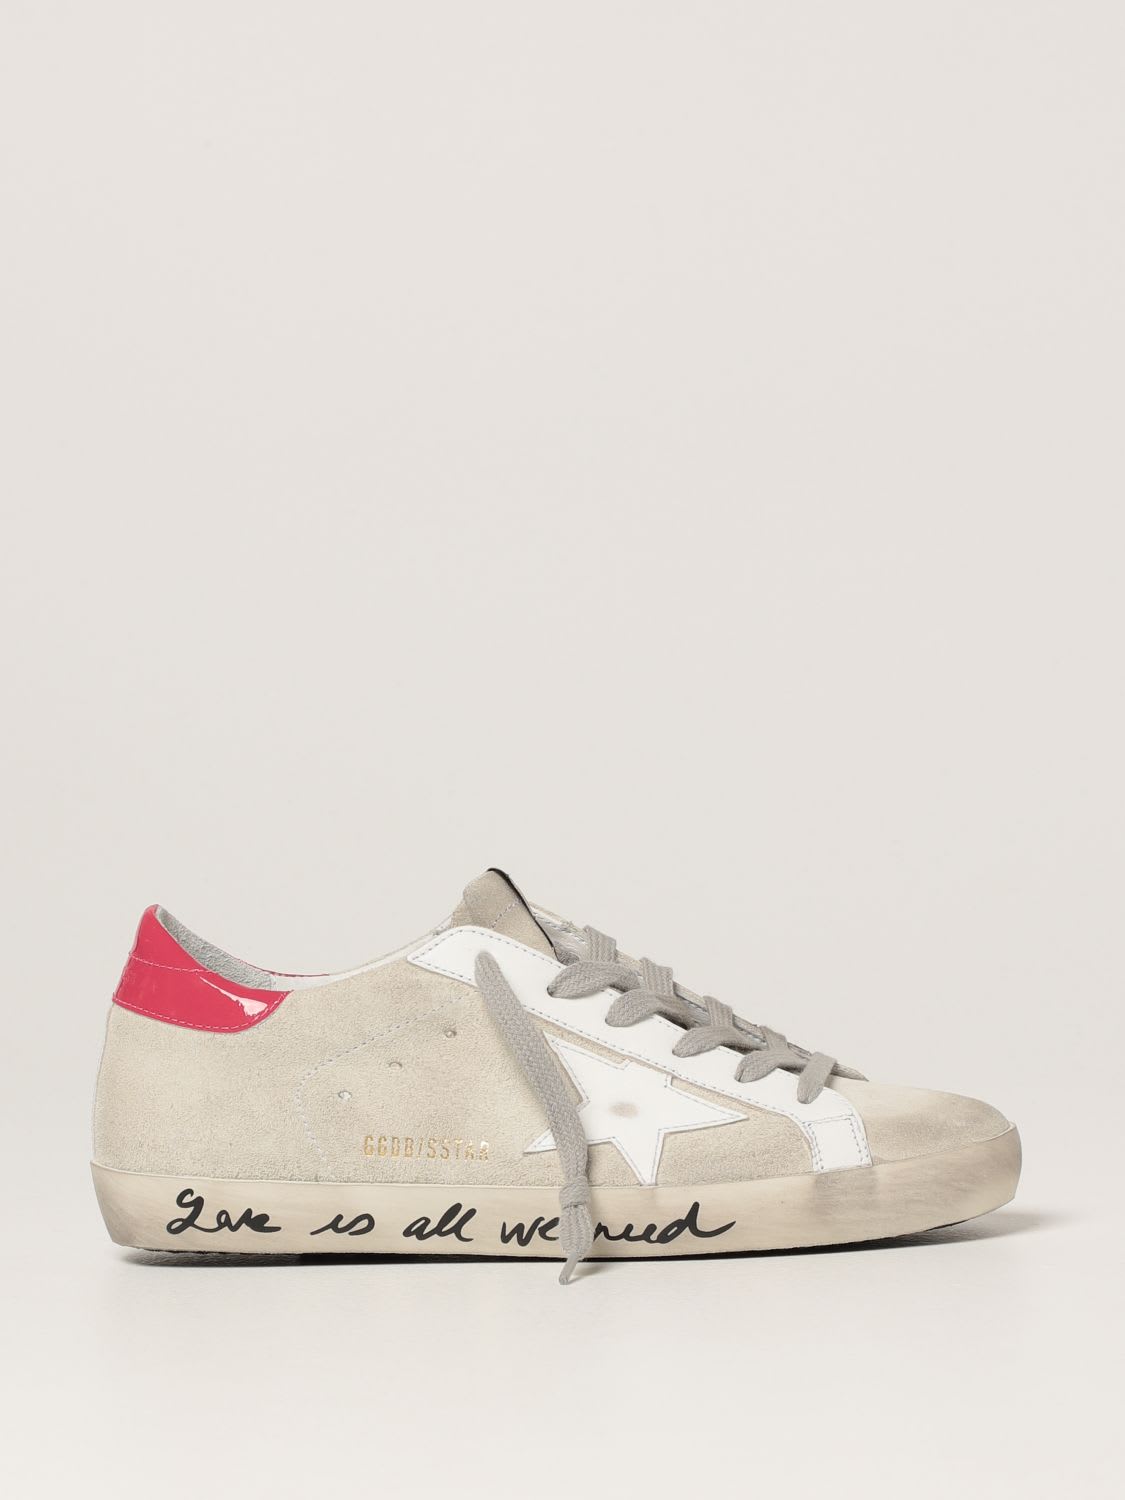 Buy Golden Goose Sneakers Superstar Classic Golden Goose Sneakers In Suede online, shop Golden Goose shoes with free shipping